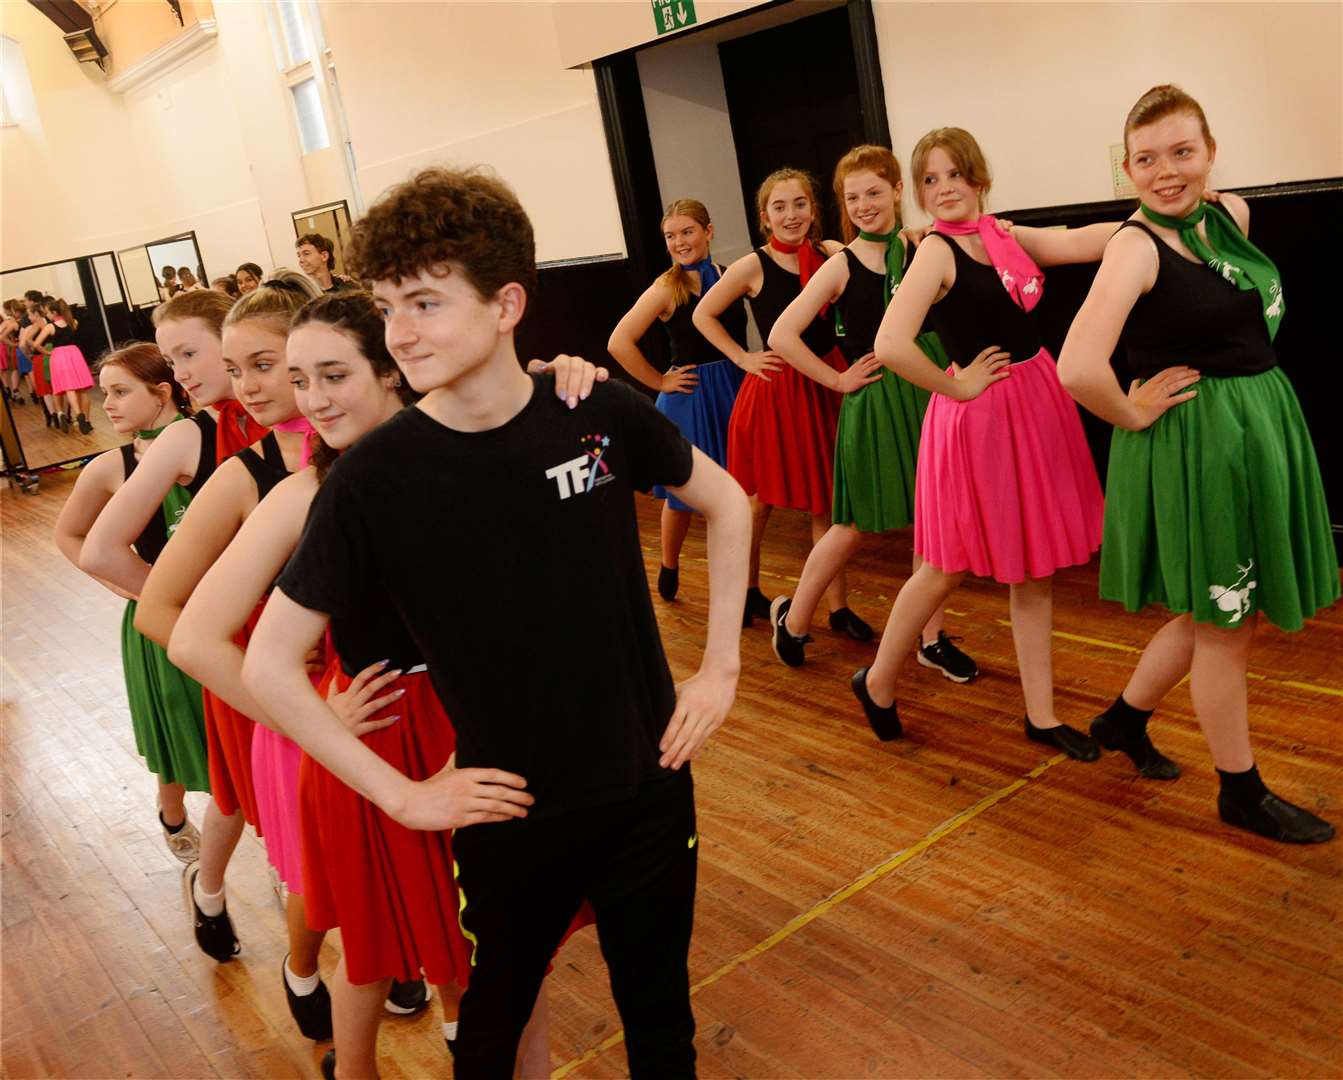 TFX Grease the musical rehearsal for the big show. Picture: Gary Anthony